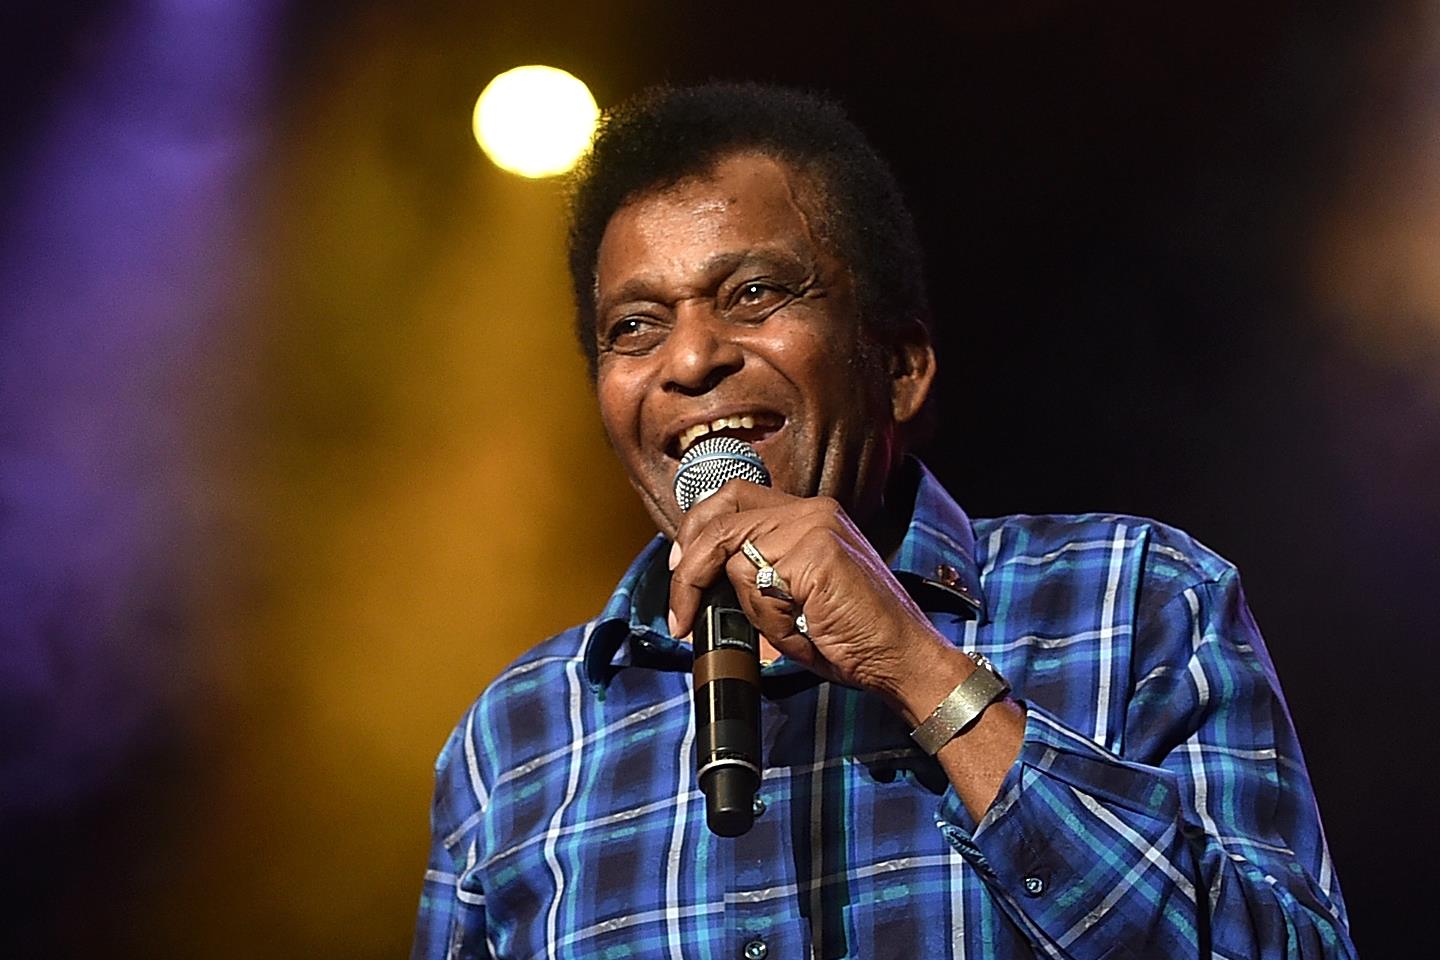 Charley Pride Tickets Charley Pride Tour Dates 2021 and Concert